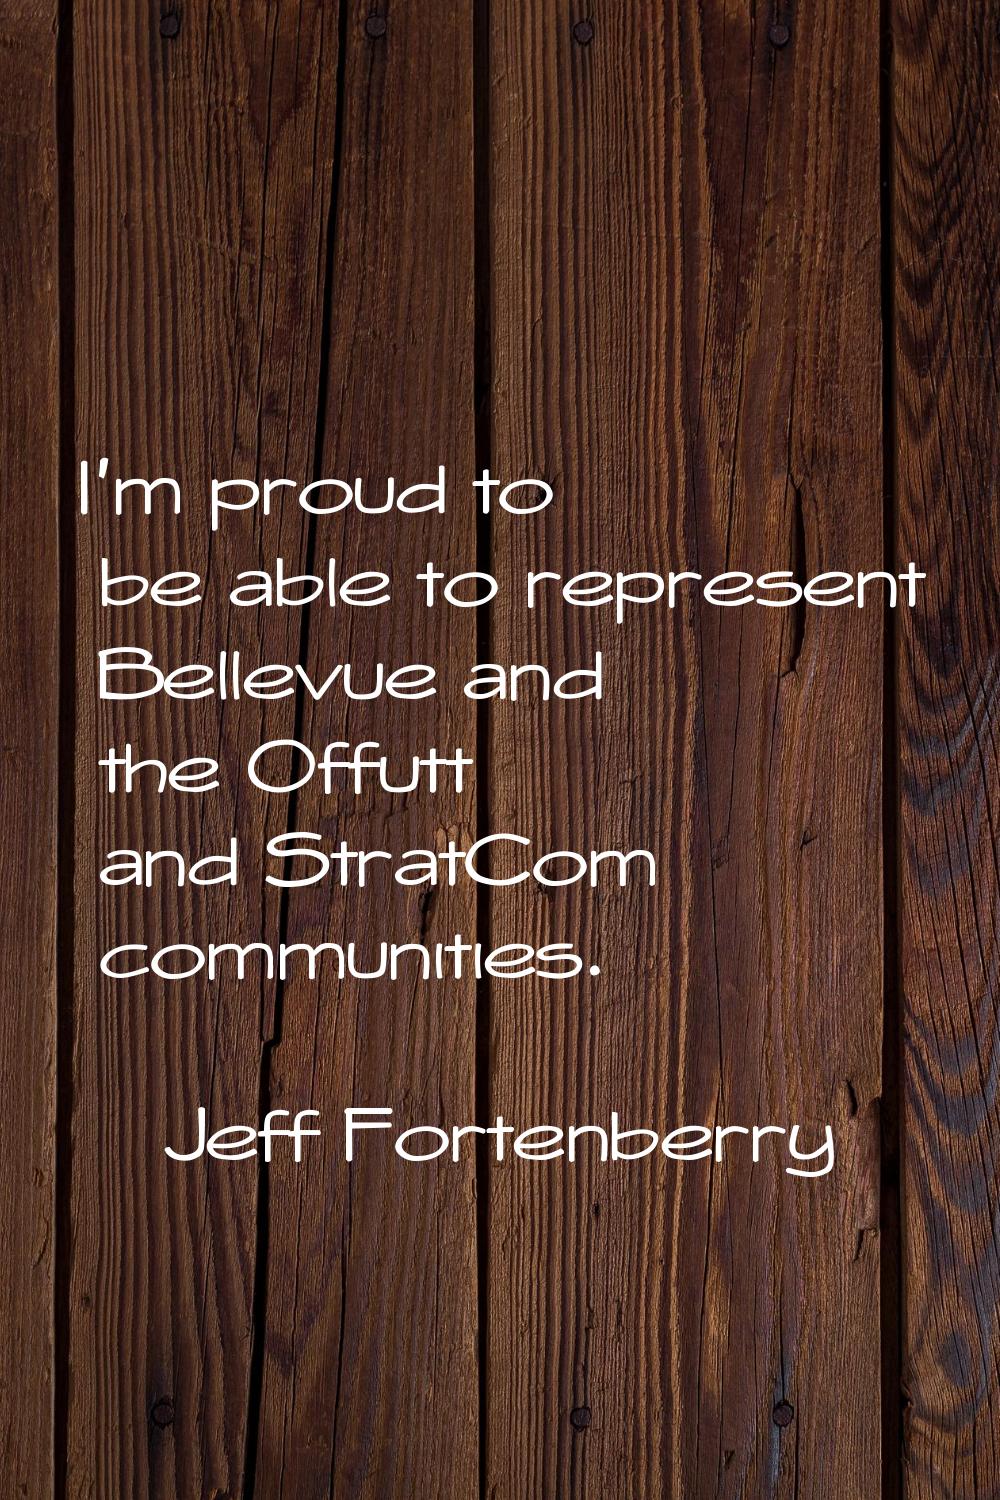 I'm proud to be able to represent Bellevue and the Offutt and StratCom communities.